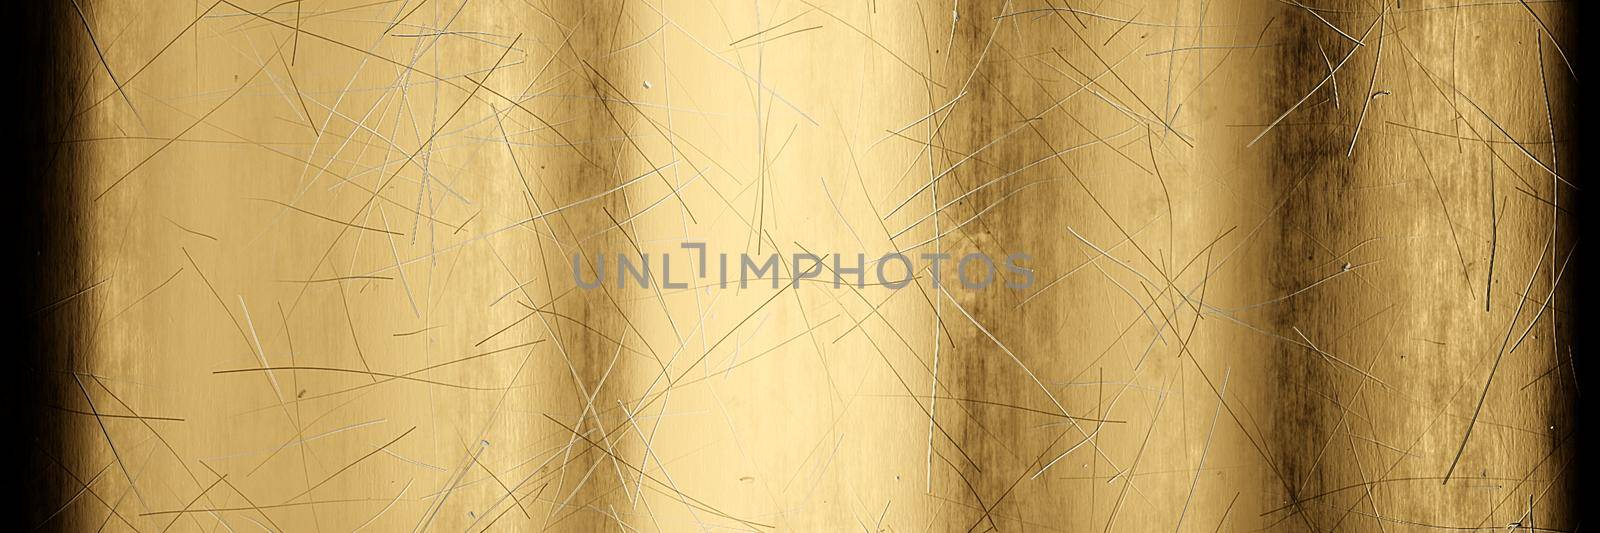 Wheathered gold and scratched texture background. 3d illustration by Taut